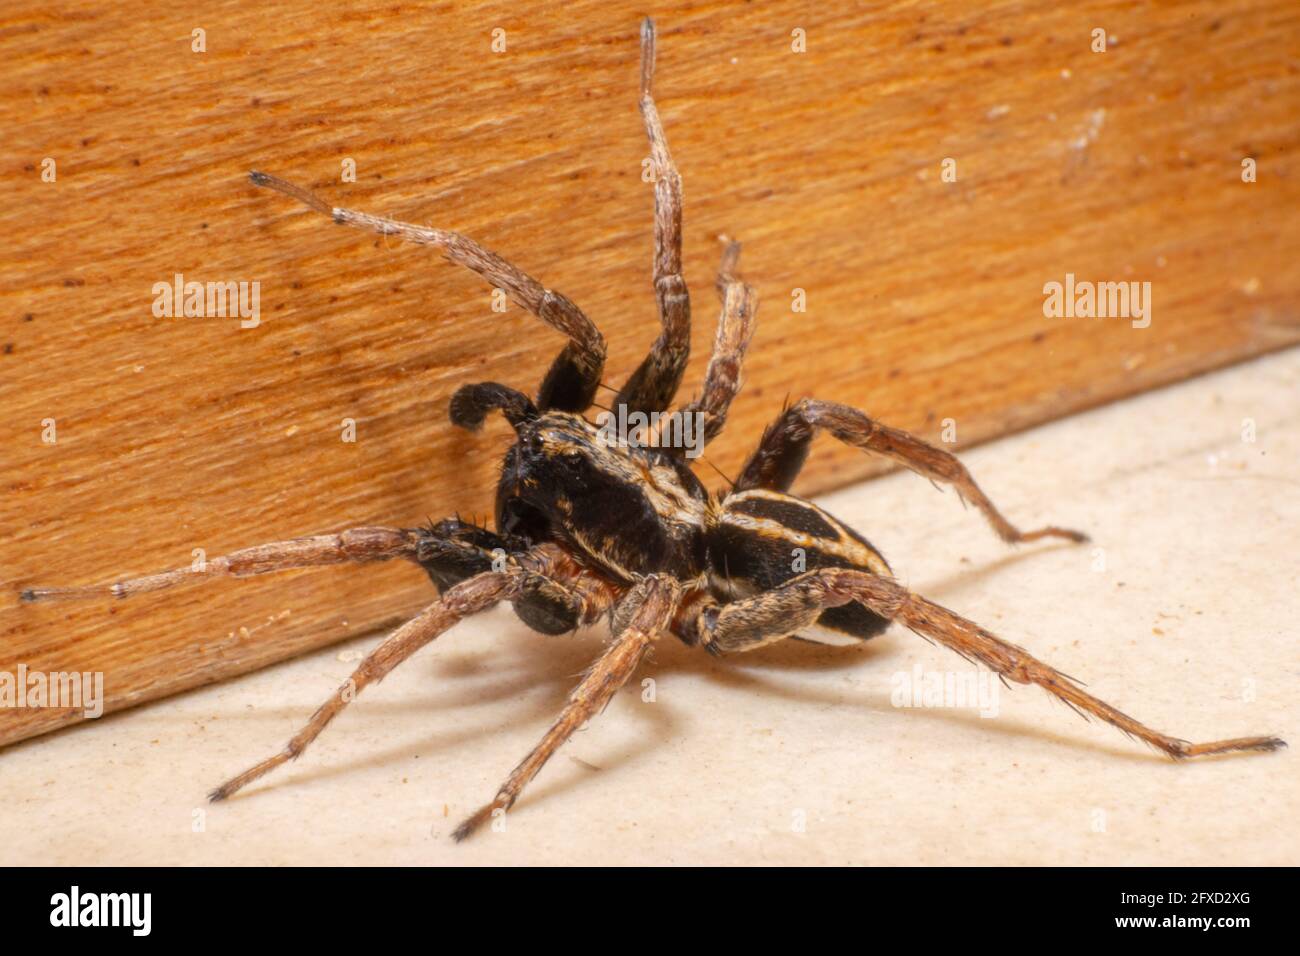 Wolf Spider robust and agile hunters with excellent eyesight walking in interior of a house. Stock Photo